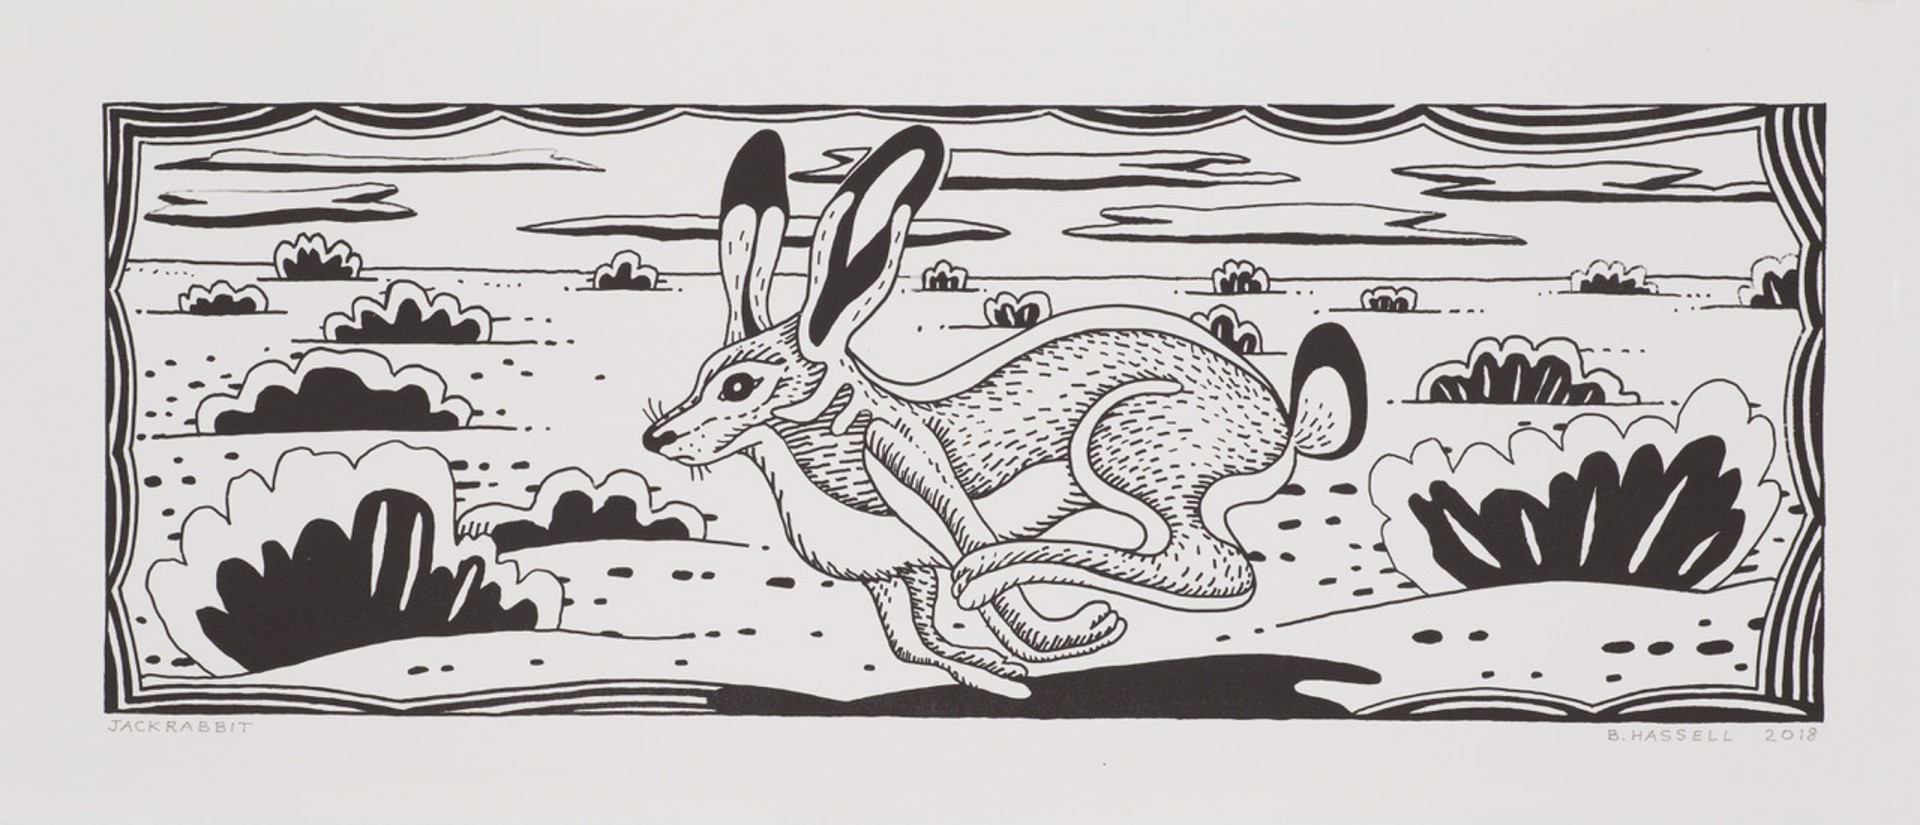 Jackrabbit by Billy Hassell